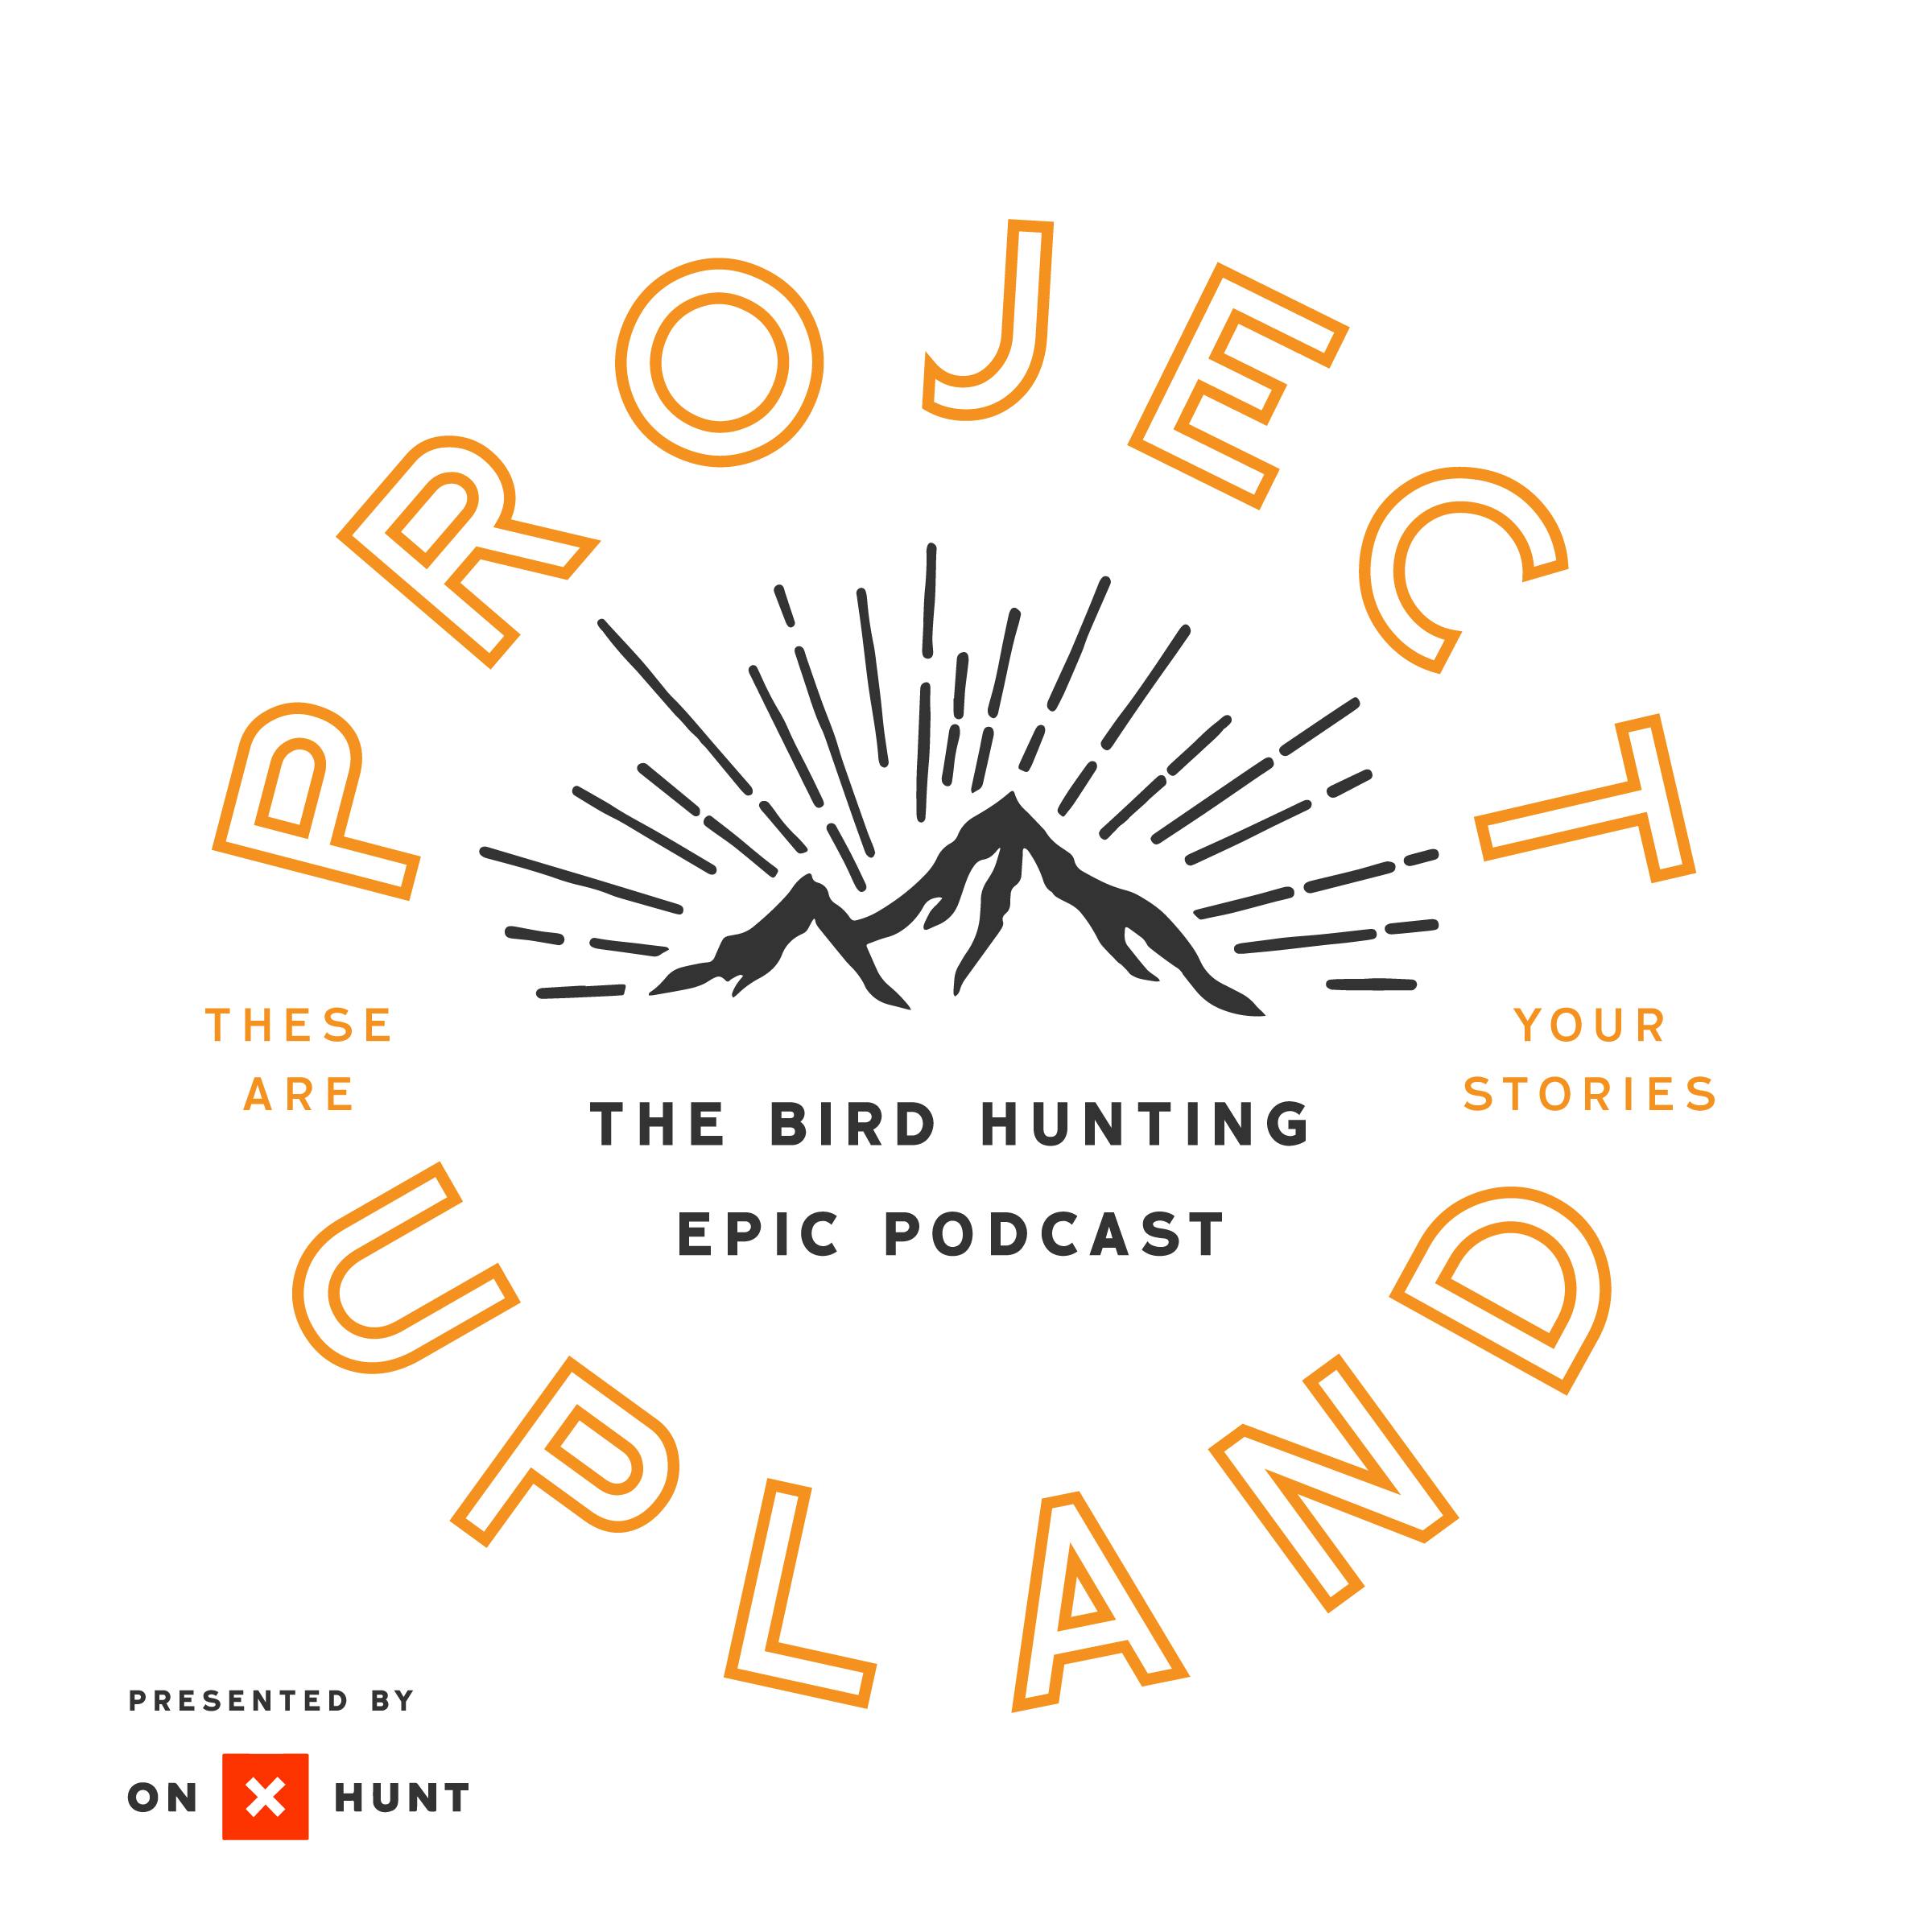 #4 | Pheasants Forever – PR Manager Jared Wiklund – Project Upland Podcast